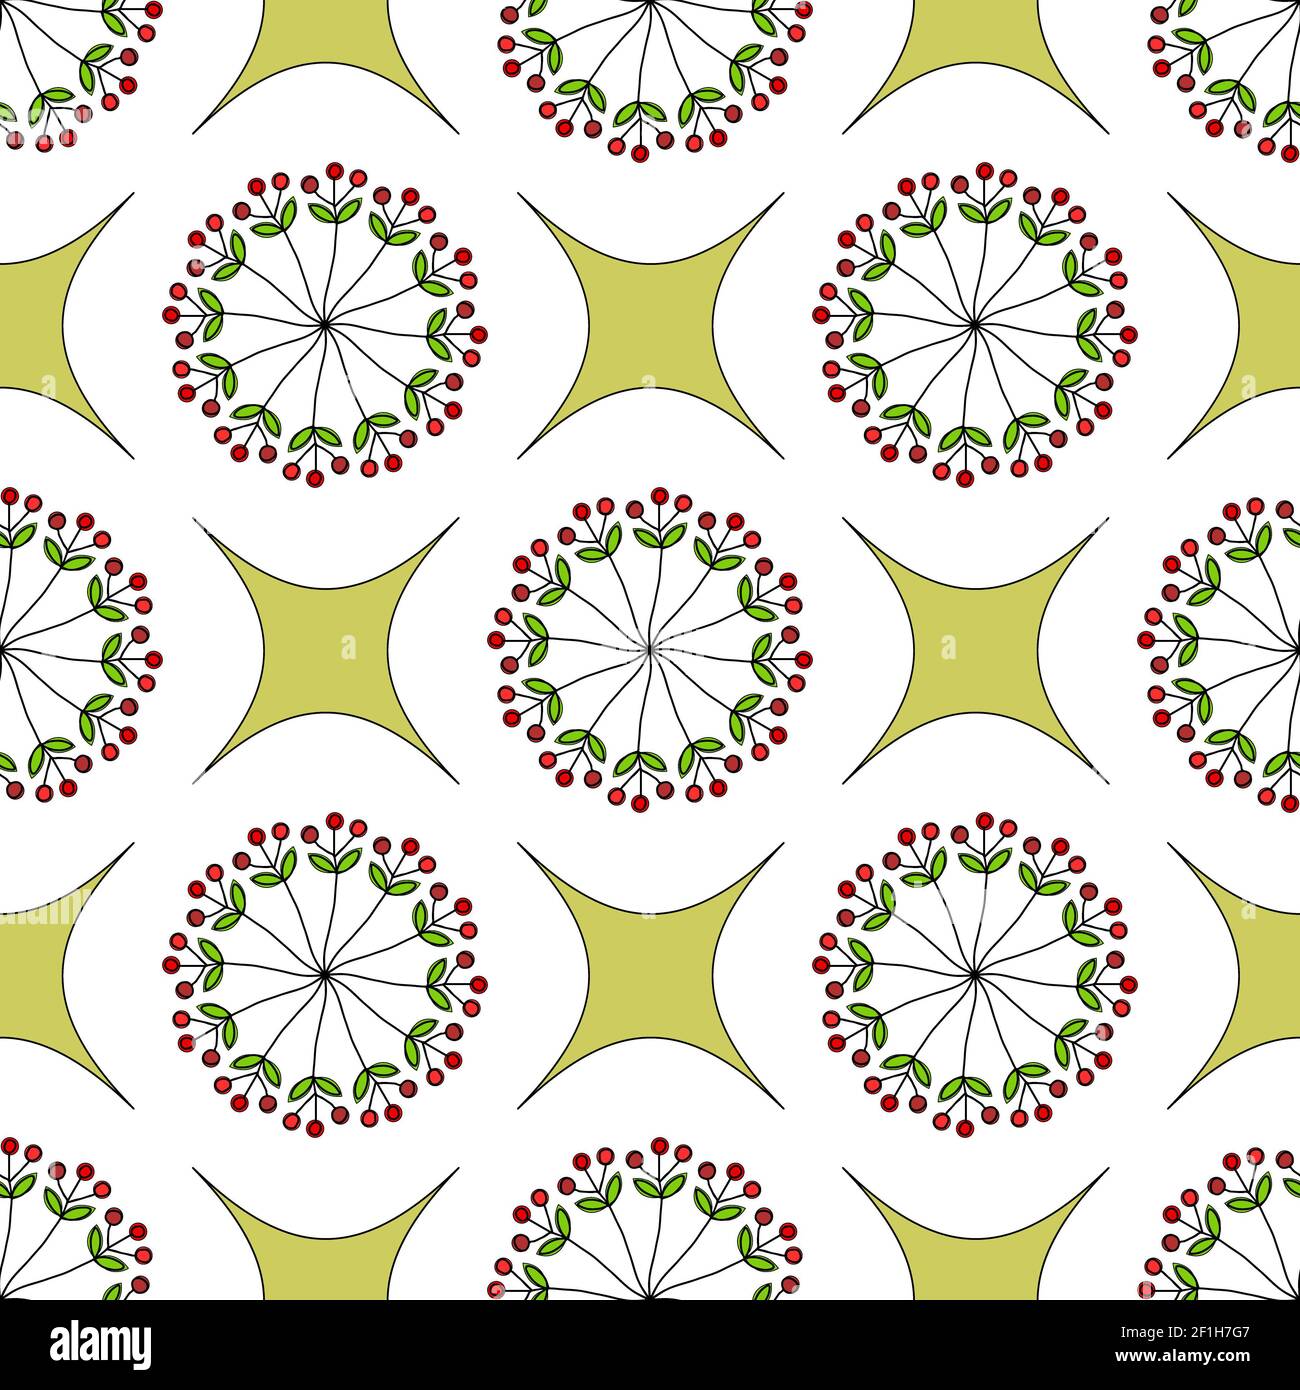 Seamless pattern with leaves and berries. Stock Photo